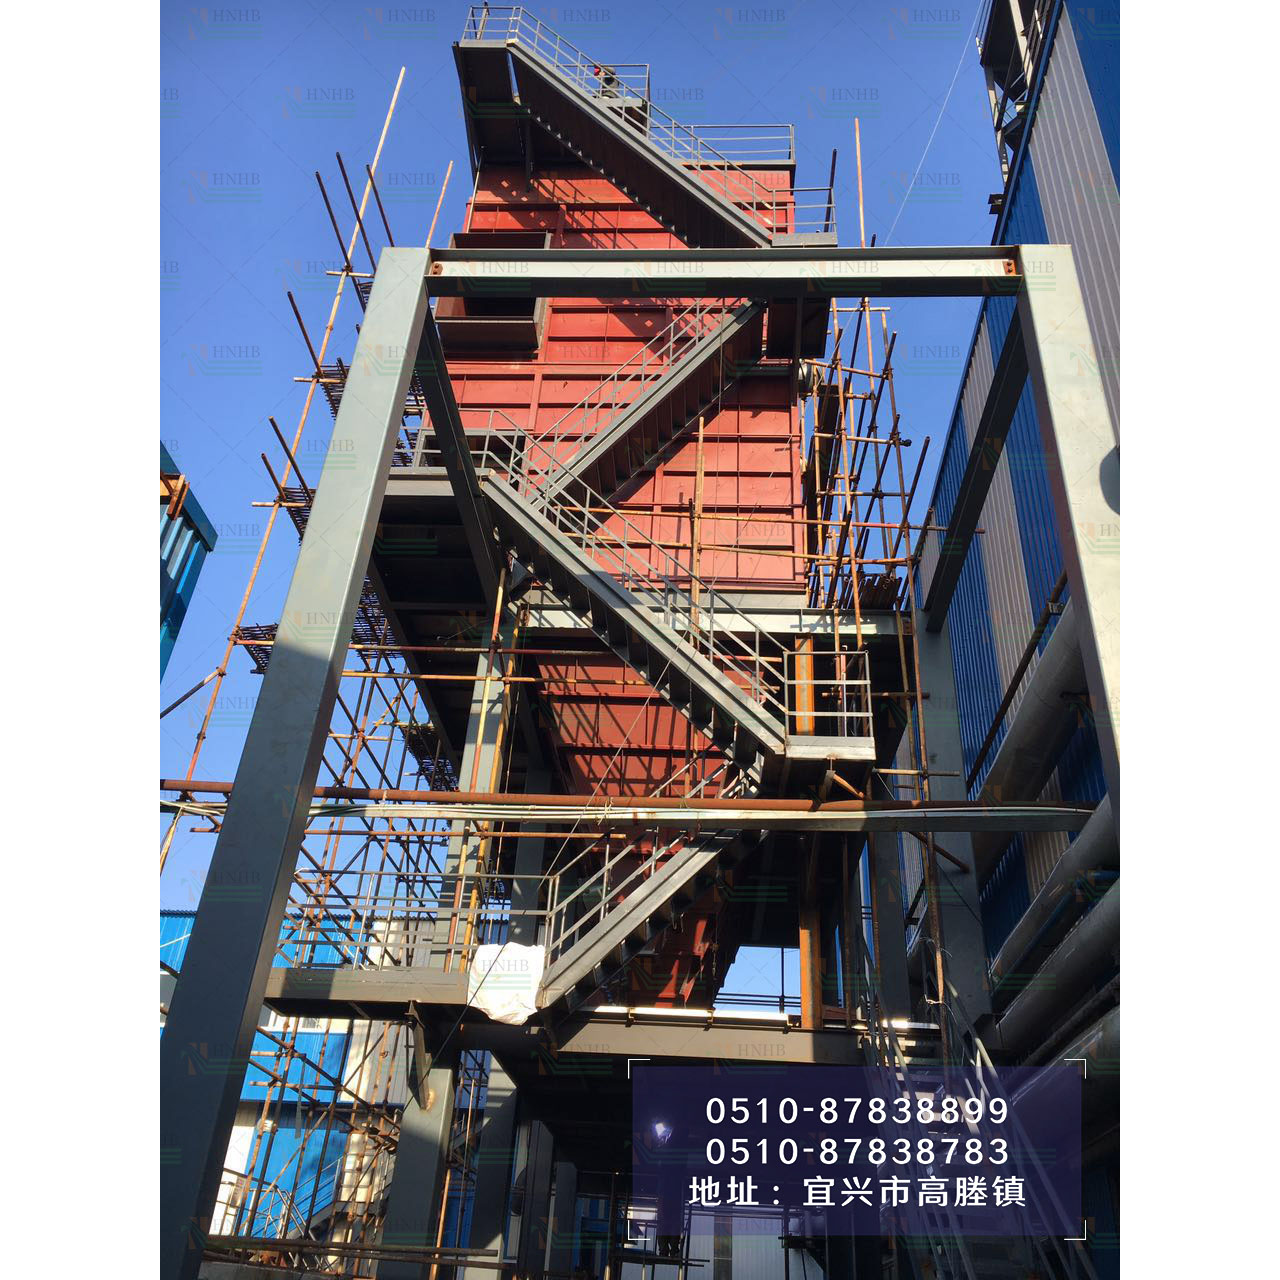 Nantong-fired organic heat carrier boiler dust removal project